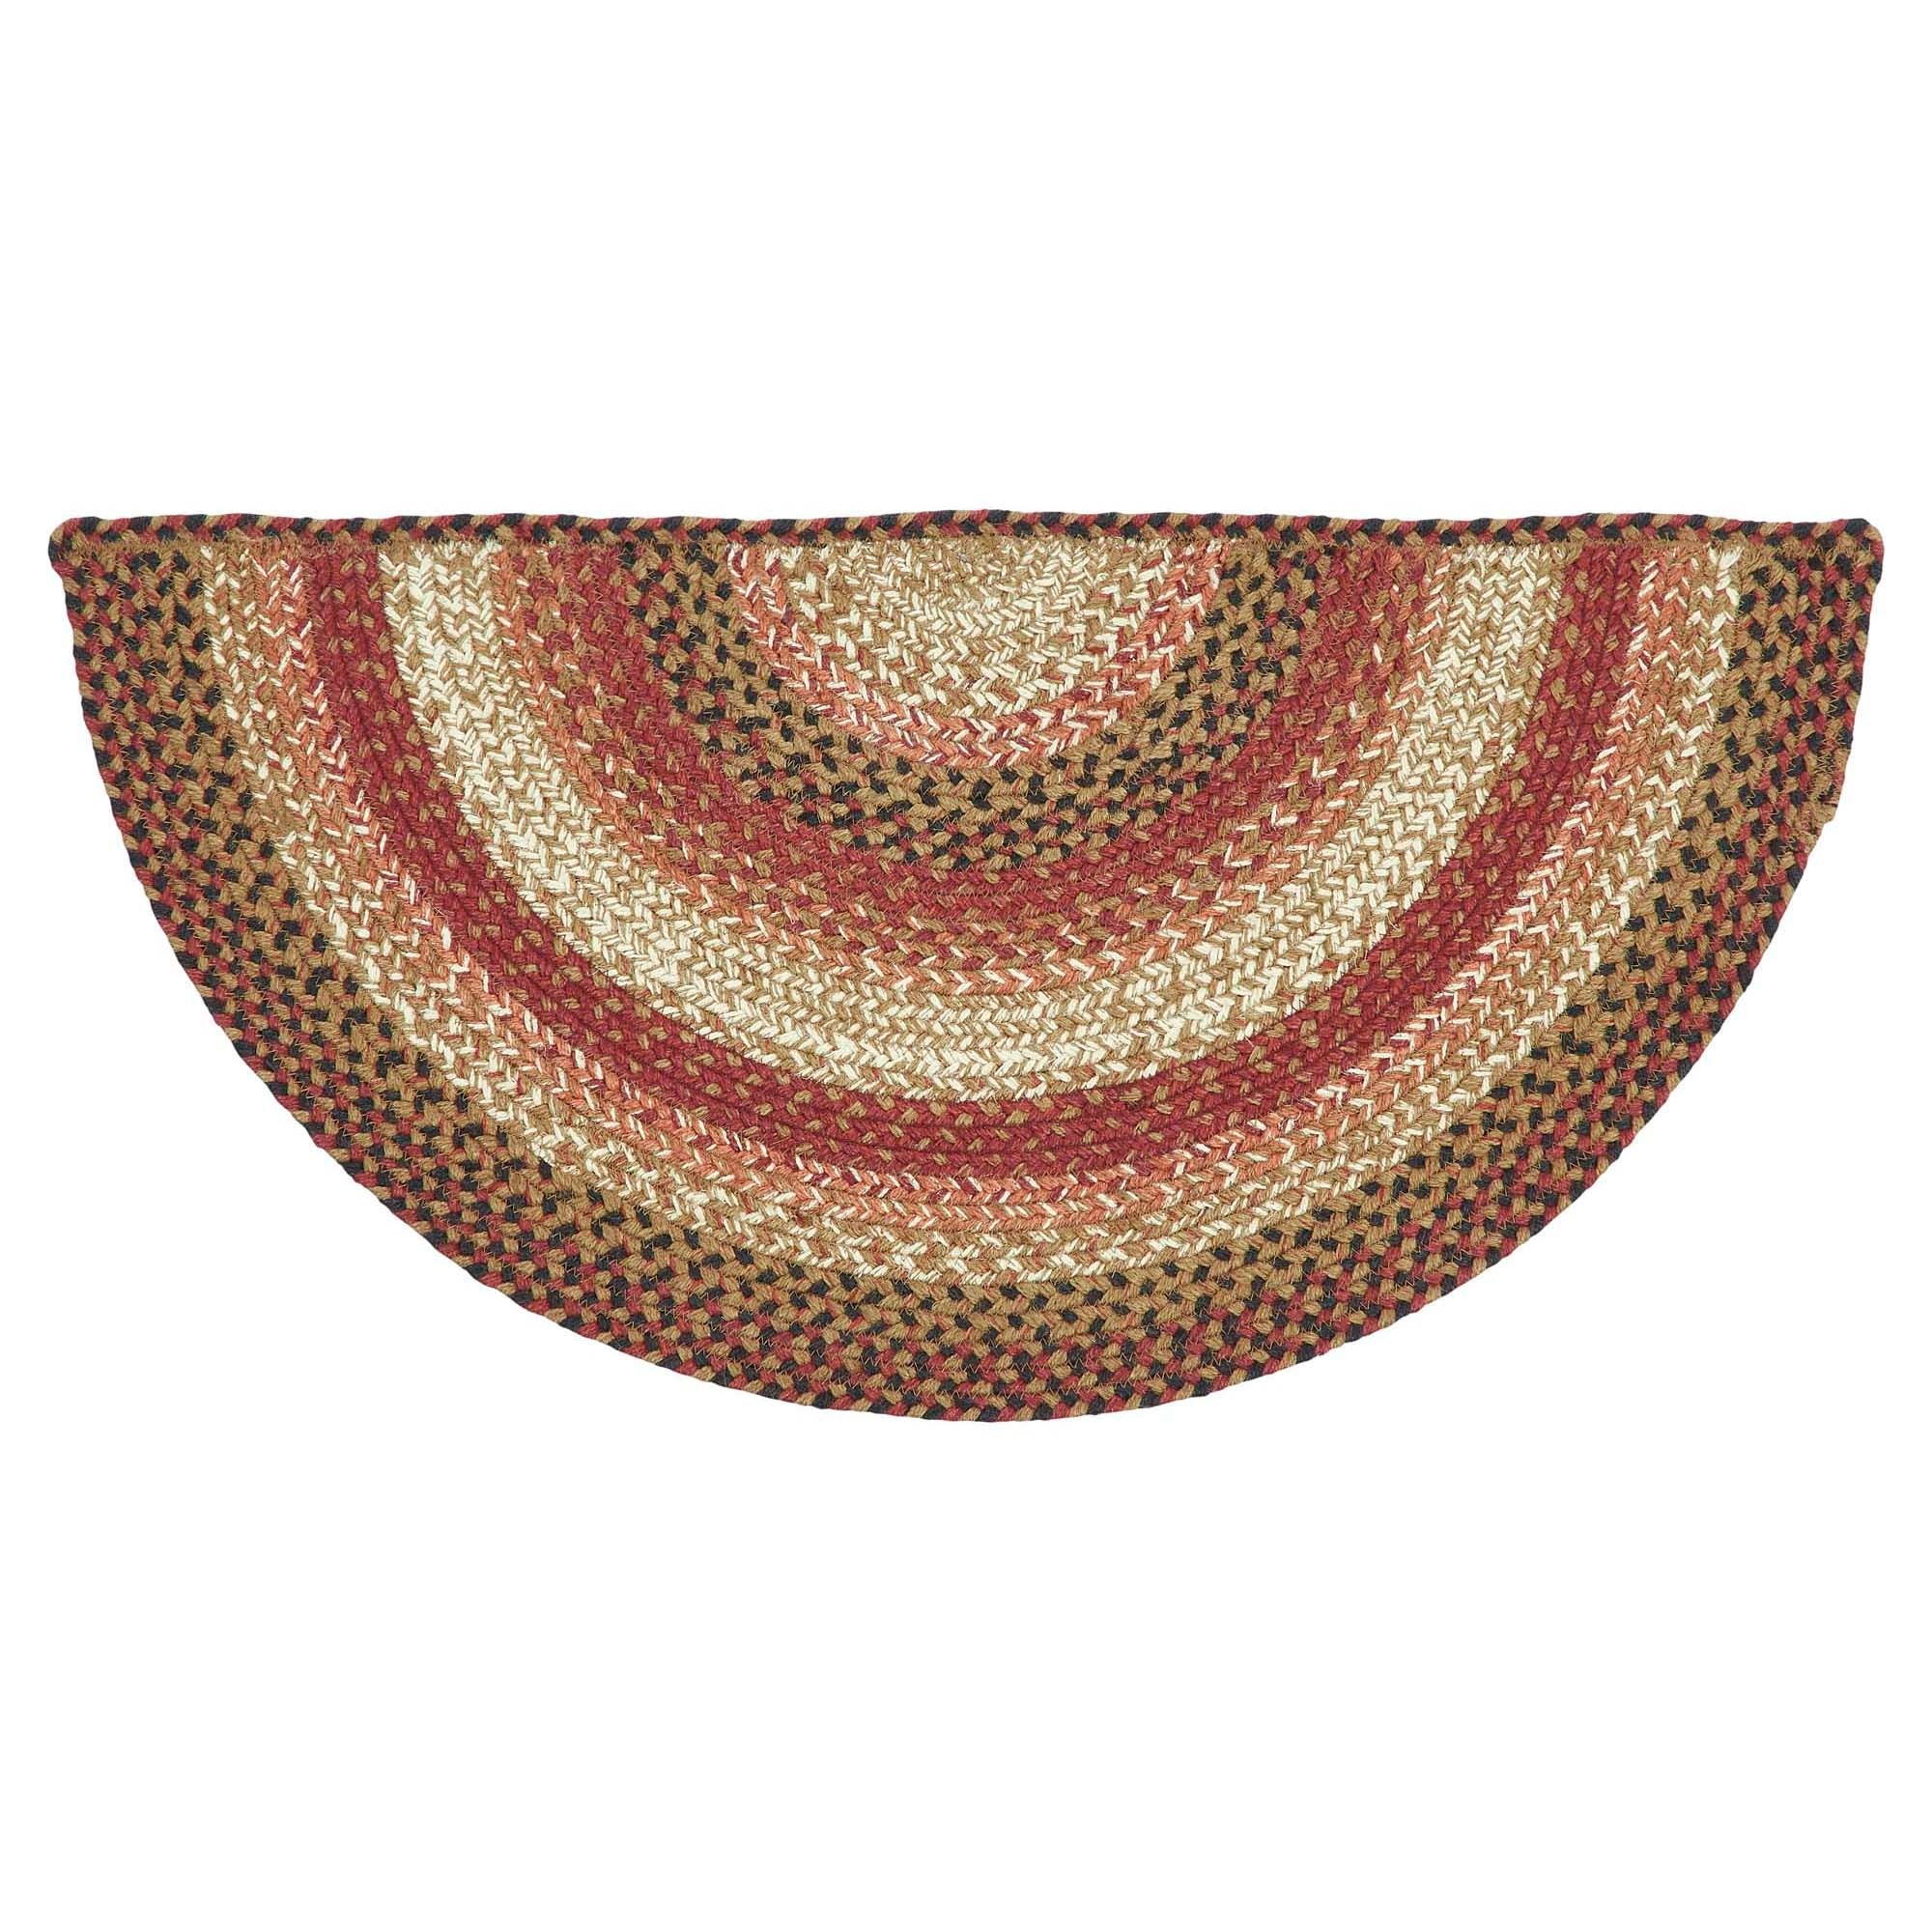 Ginger Spice Jute Braided Rug Half Circle with Rug Pad 16.5"x33" VHC Brands